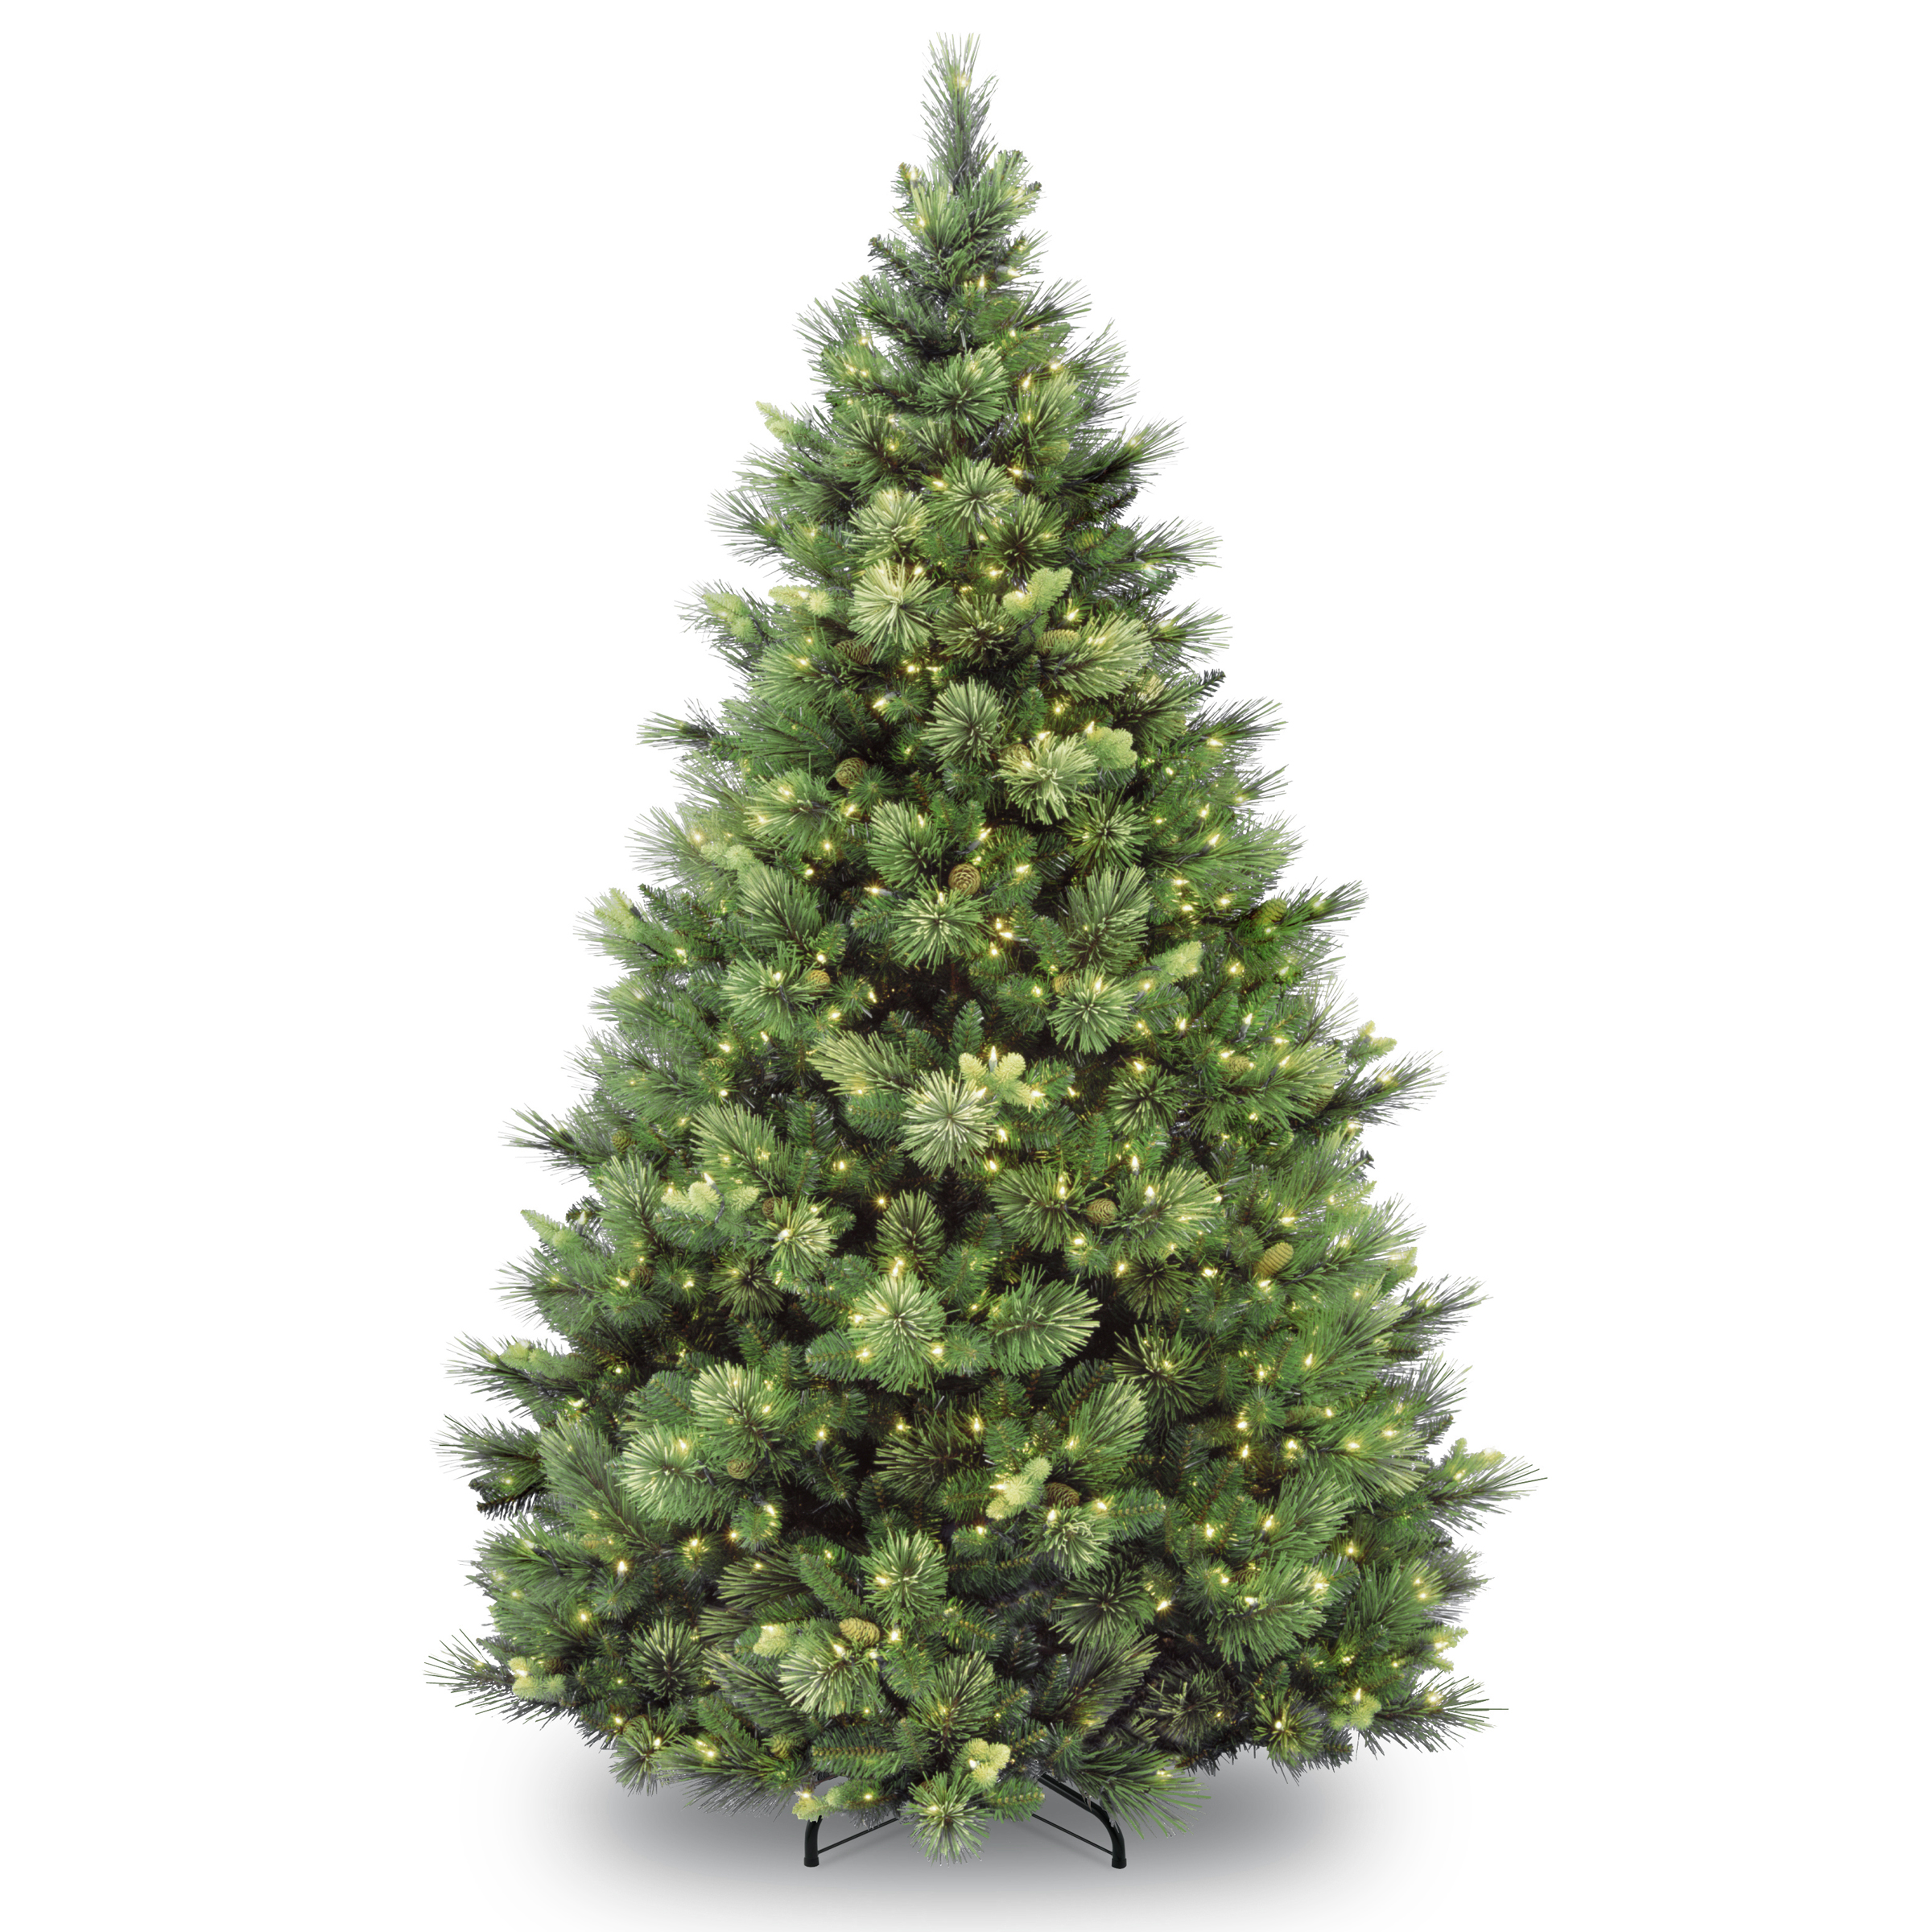 7 ft. Carolina Pine Tree with Clear Lights - image 1 of 3